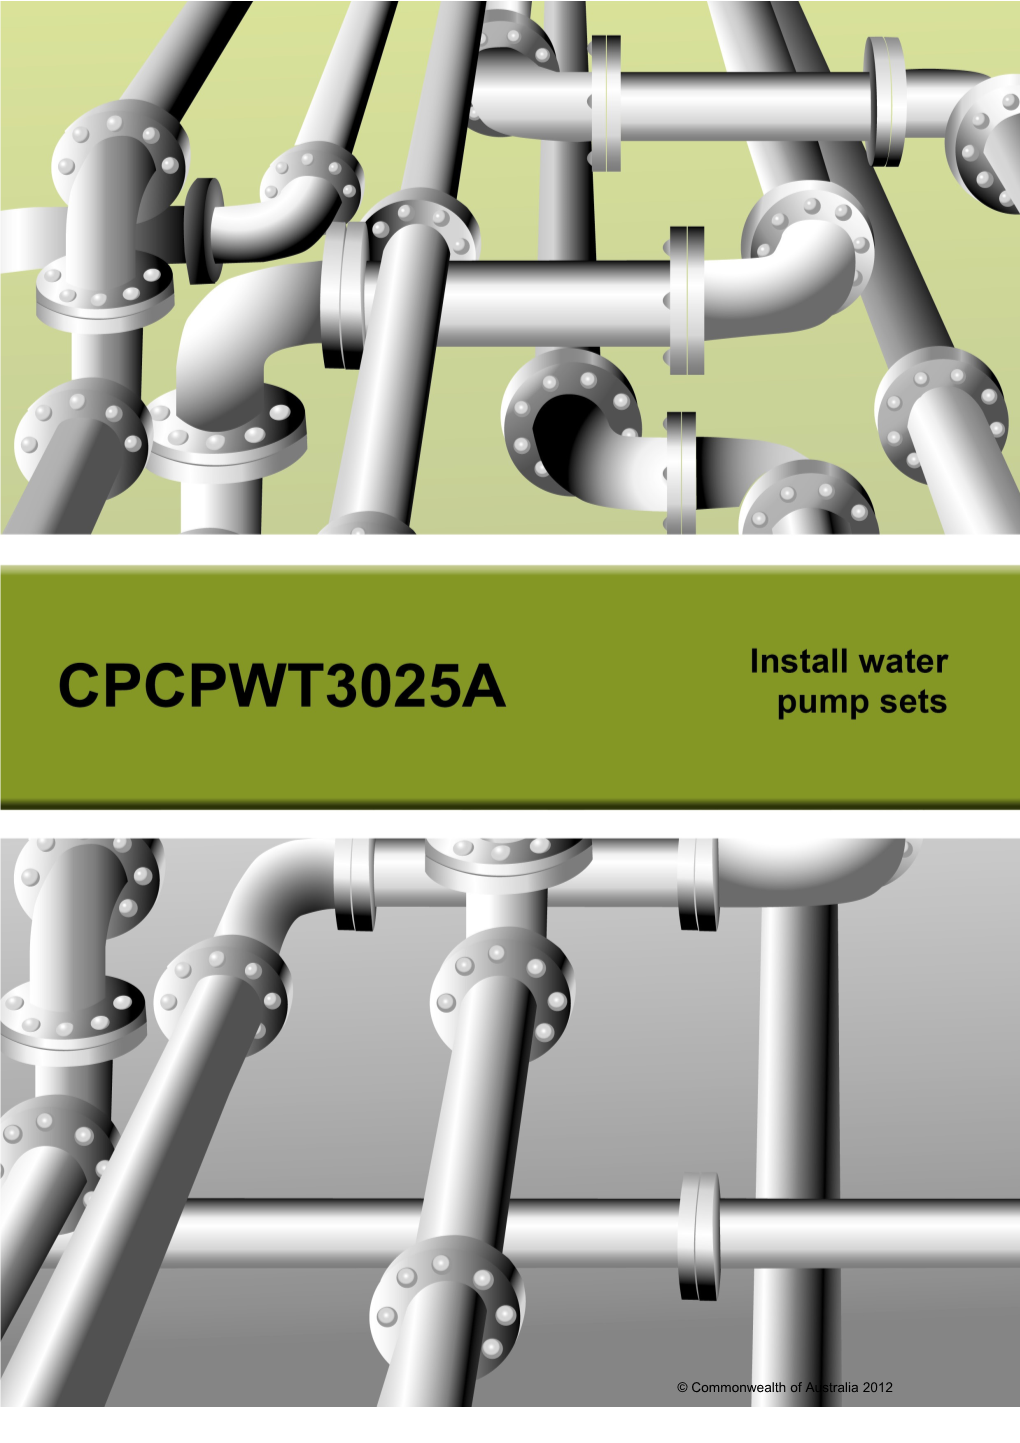 Cpcpwt3025a - Install Water Pumpsets